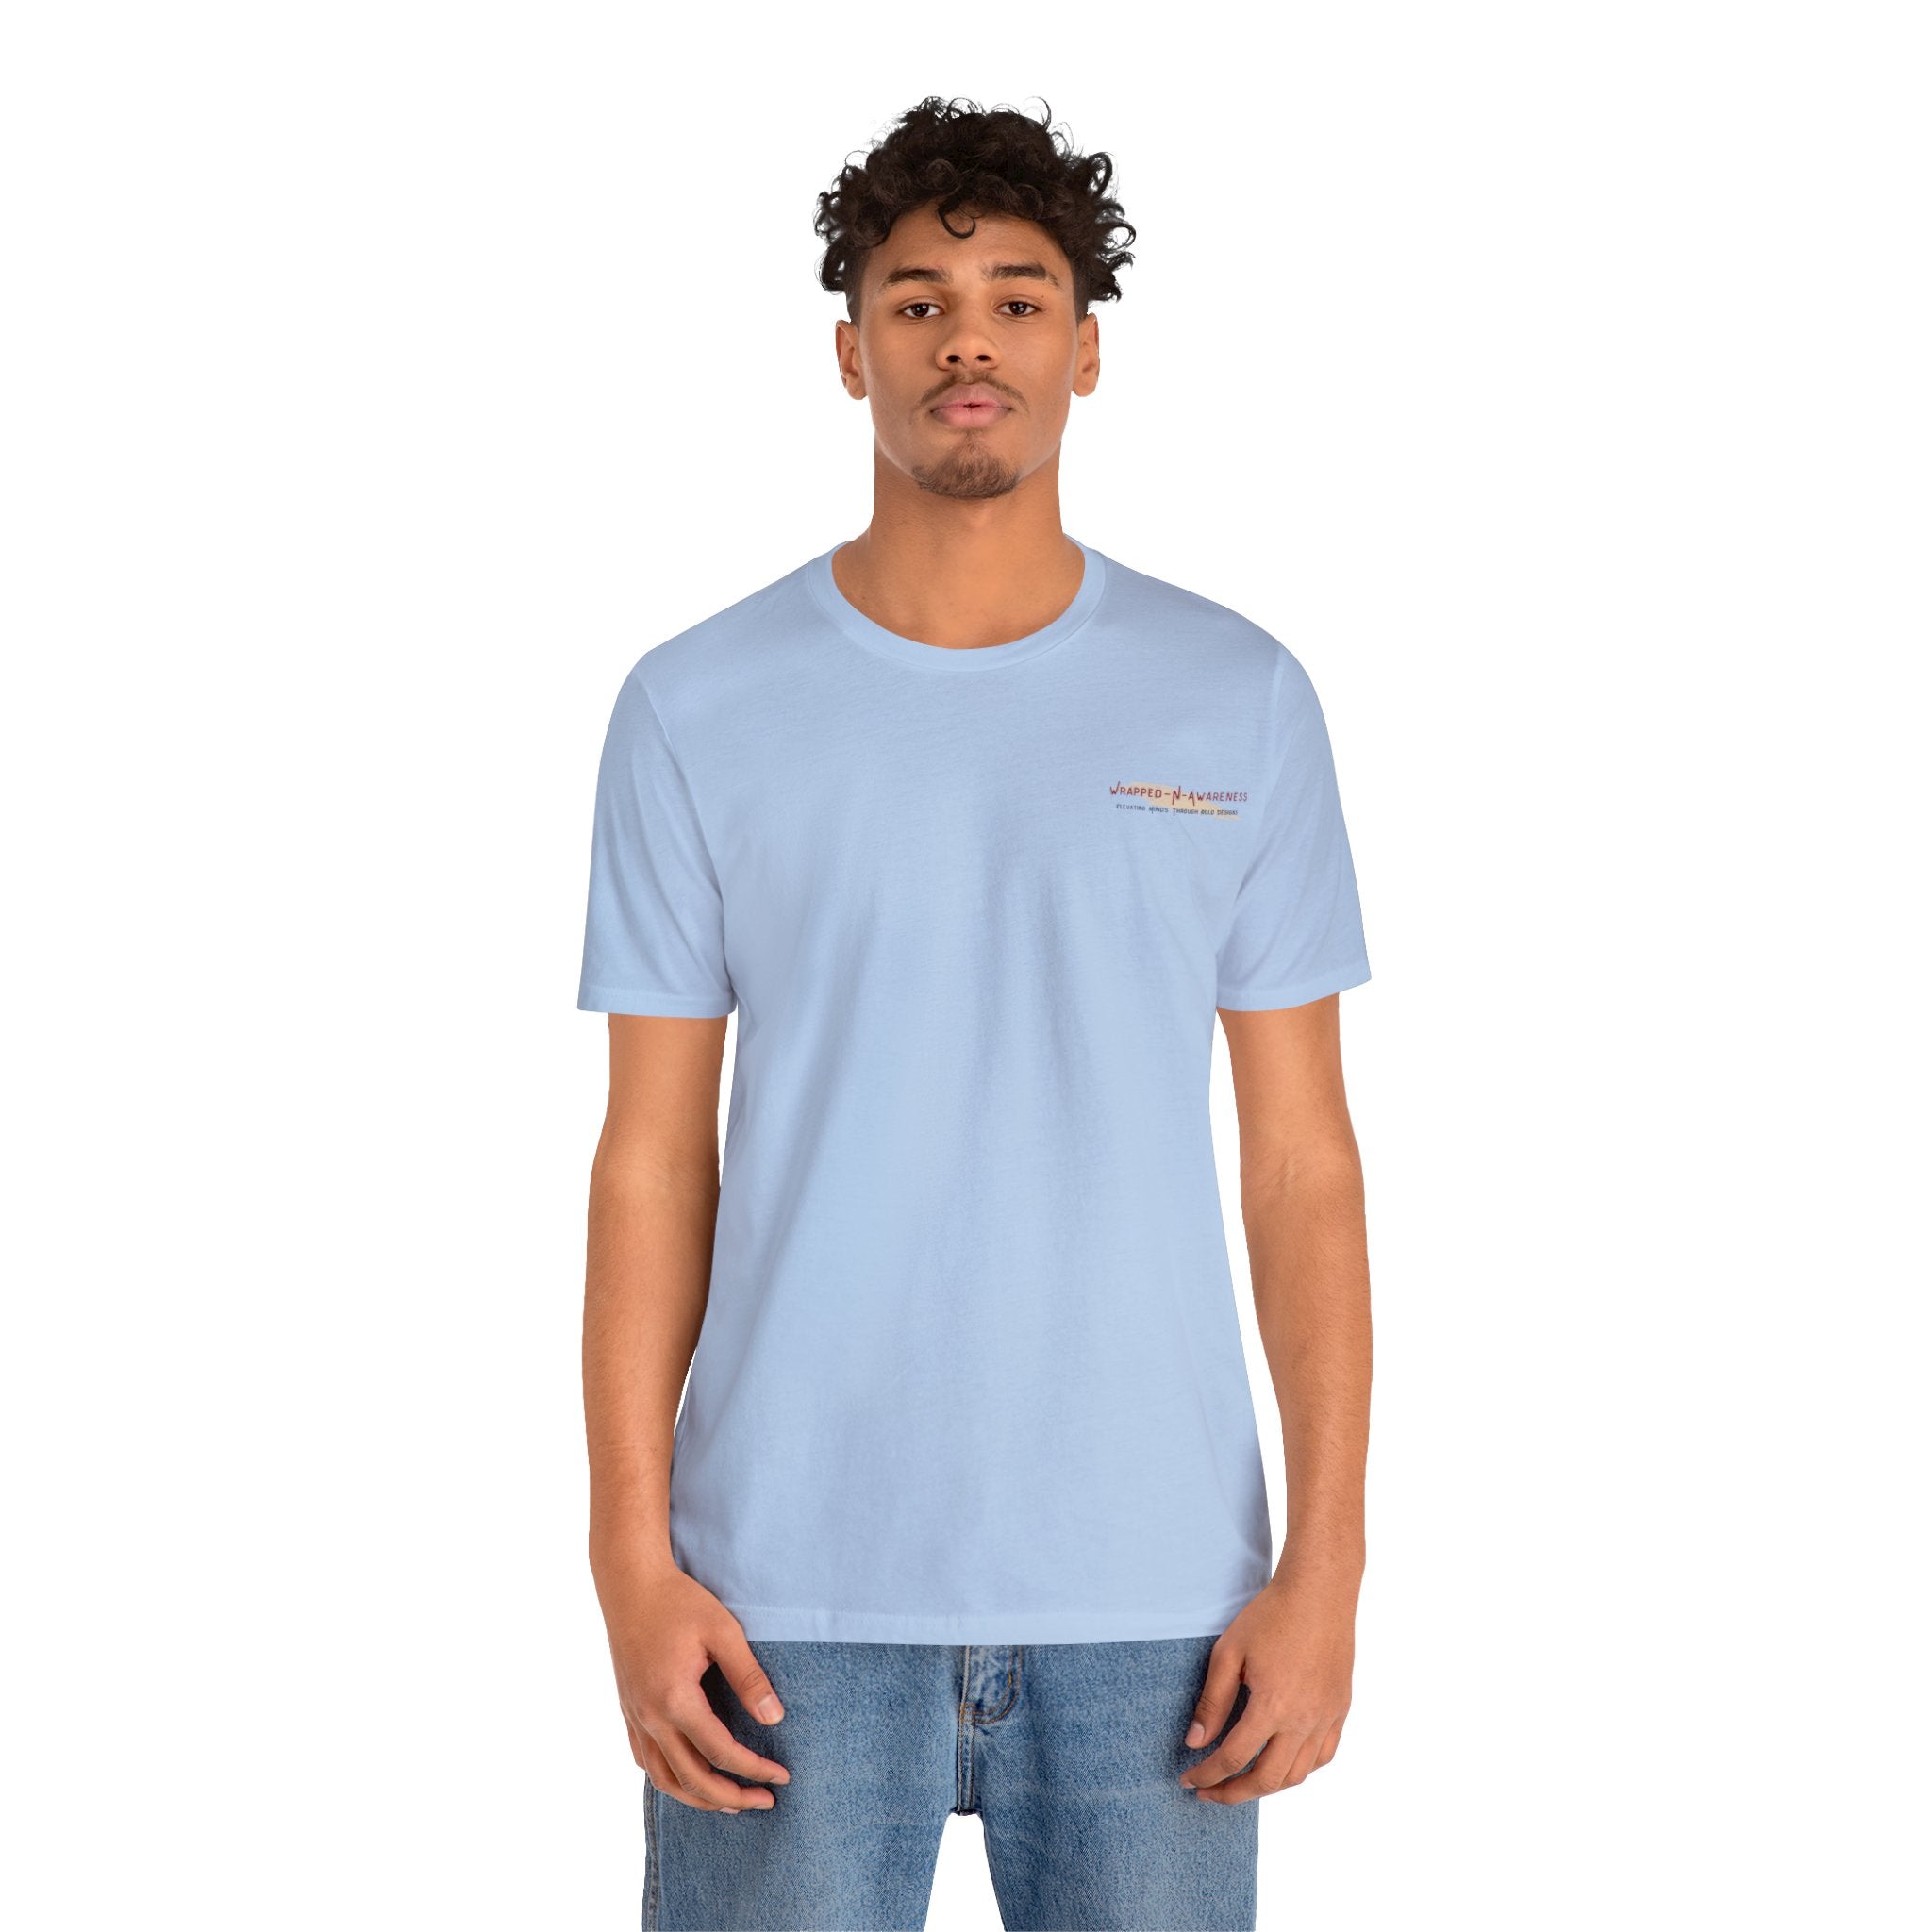 Wrapped-N-Awareness Jersey Tee Bella+Canvas 3001 Baby Blue Classic Tee Comfortable Tee Cotton T-Shirt Graphic Tee JerseyTee Statement Shirt T-shirt Tee Unisex Apparel T-Shirt 12928735744391057062_2048 Printify